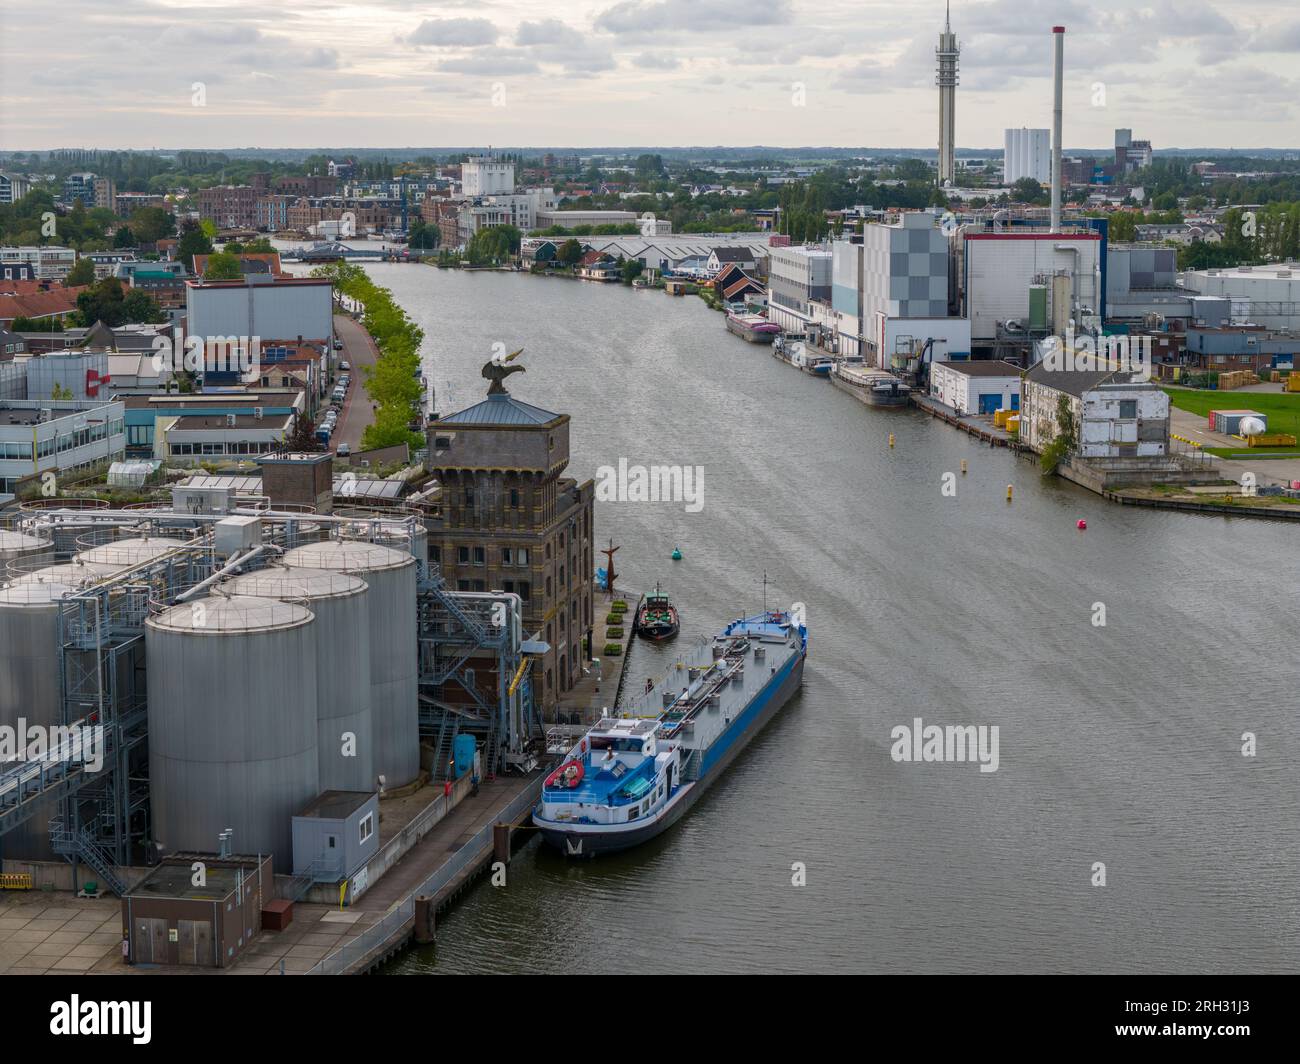 Aerial drone photo of a cargo barge docked at an industrial zone in Wormerveer, the Netherlands Stock Photo